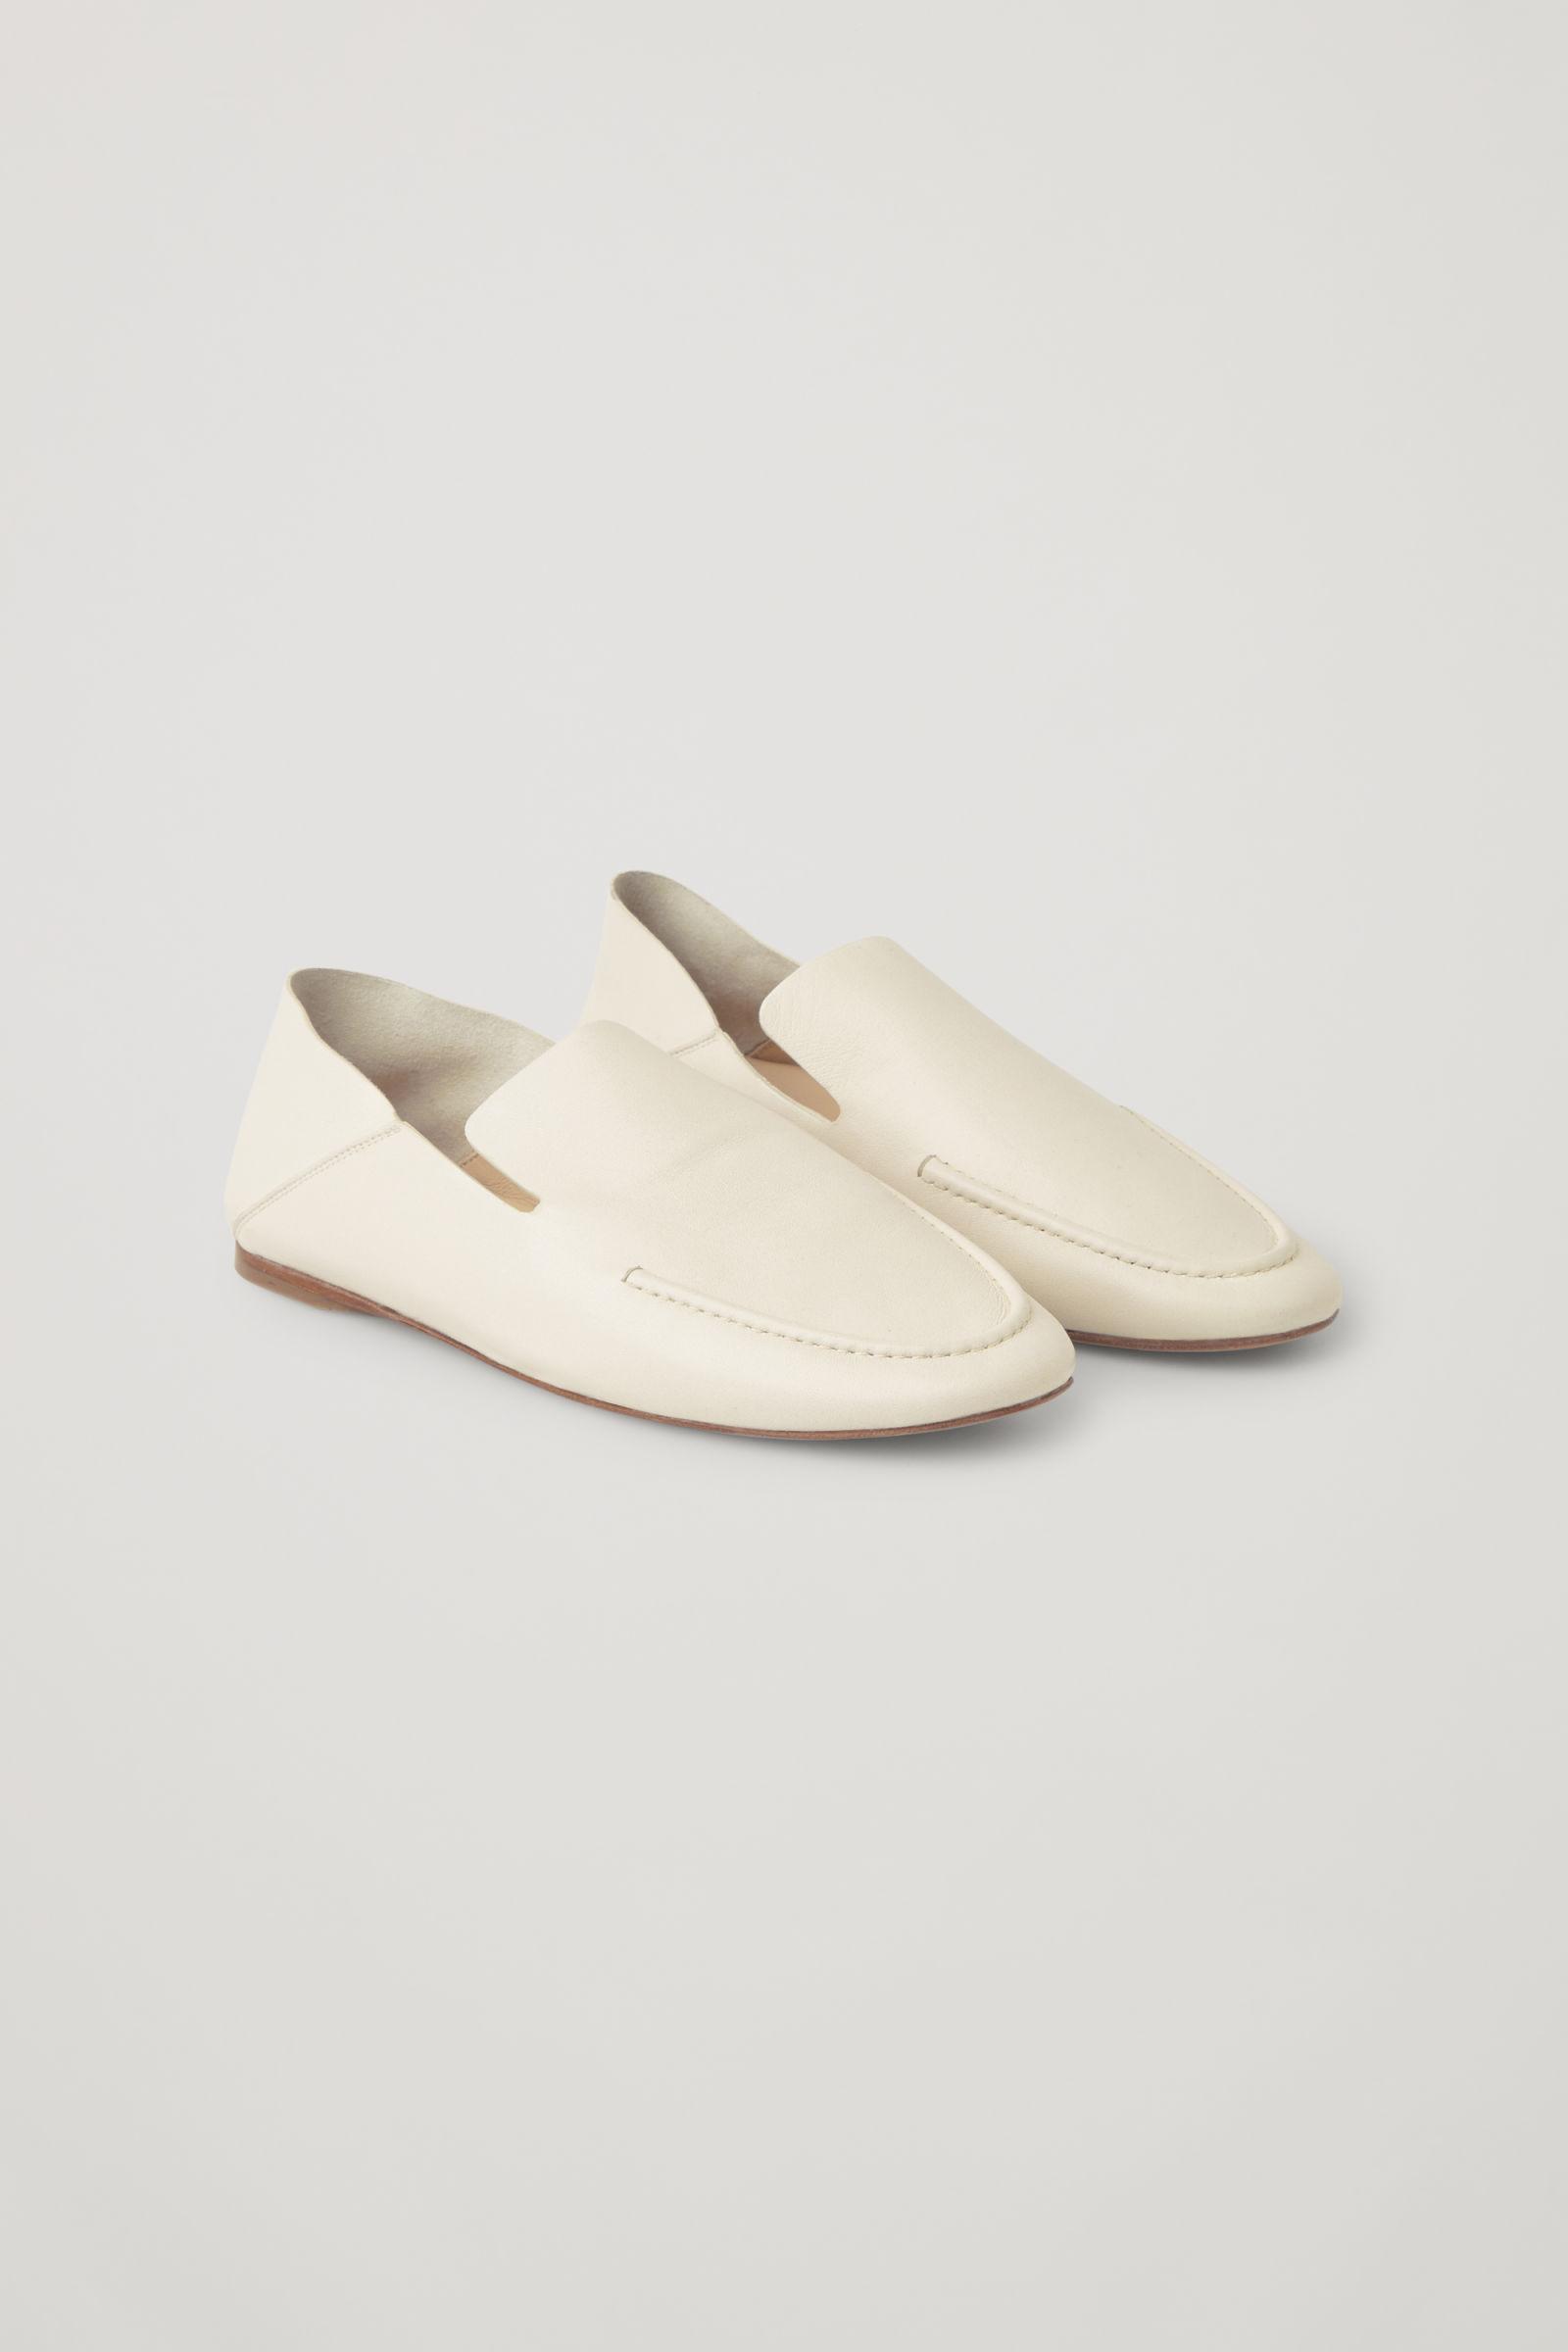 COS Leather Loafers in White | Lyst UK